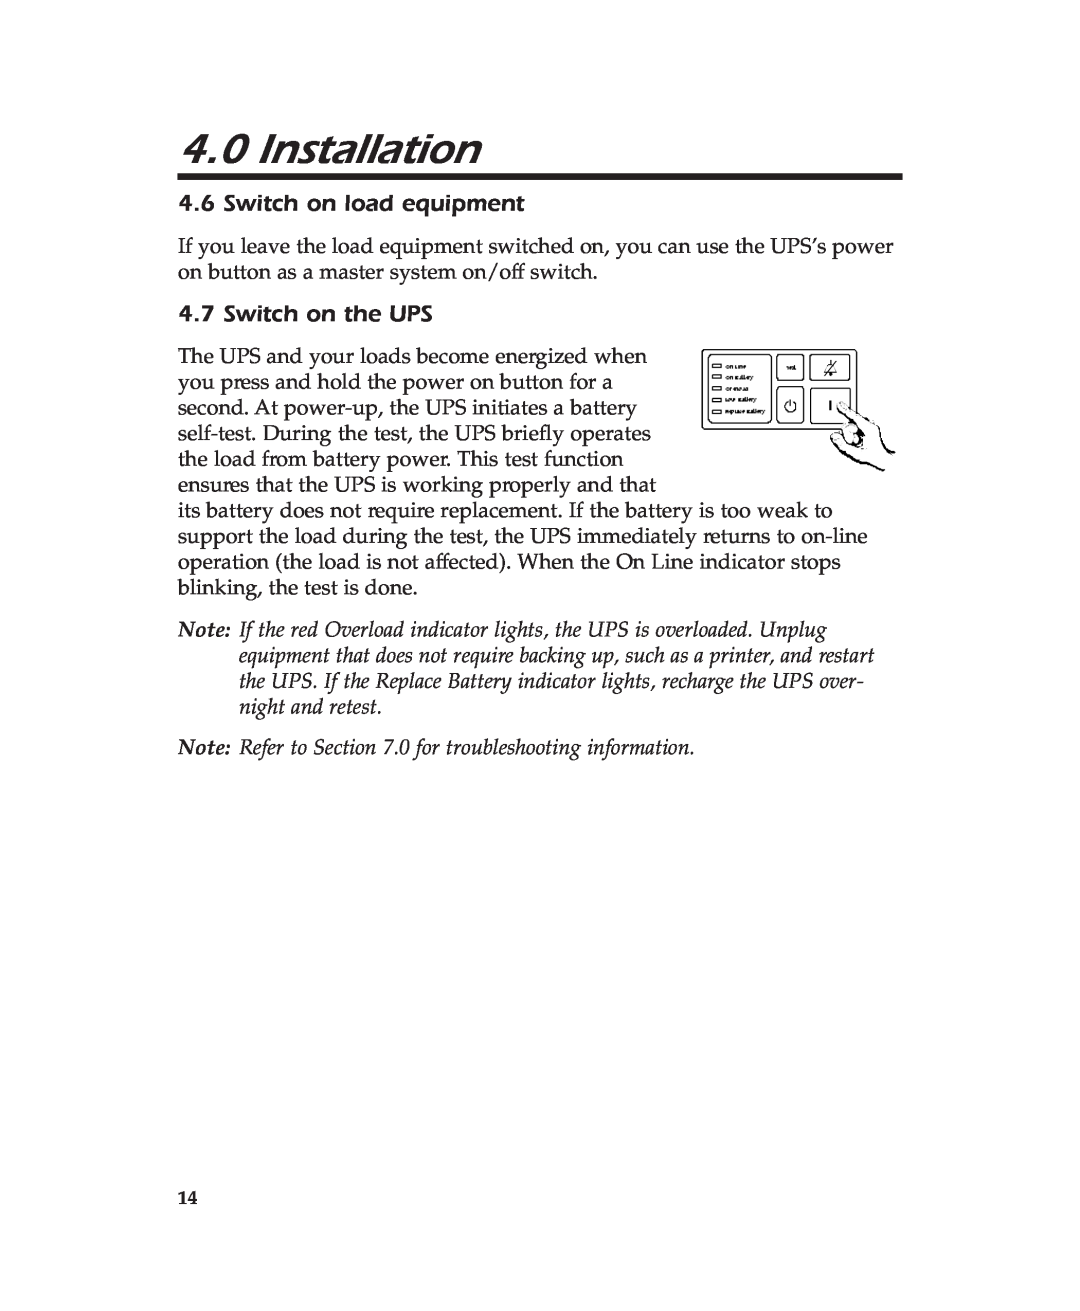 APC 600 user manual Switch on load equipment, Switch on the UPS, Installation 